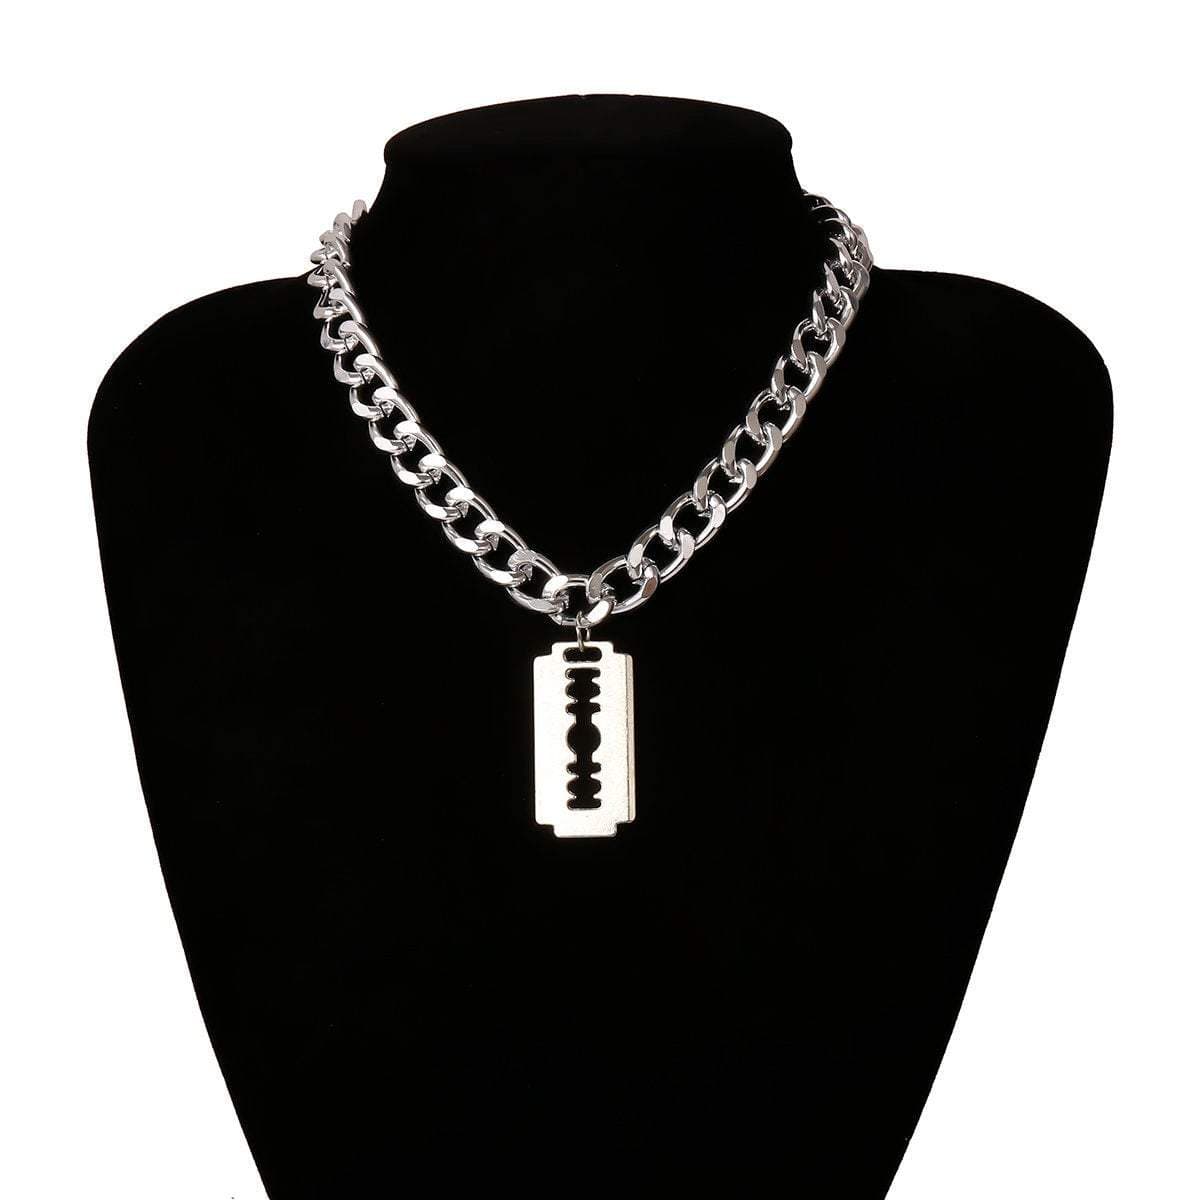 Necklace BLACK STAINLESS STEEL RAZOR BLADE and Chain